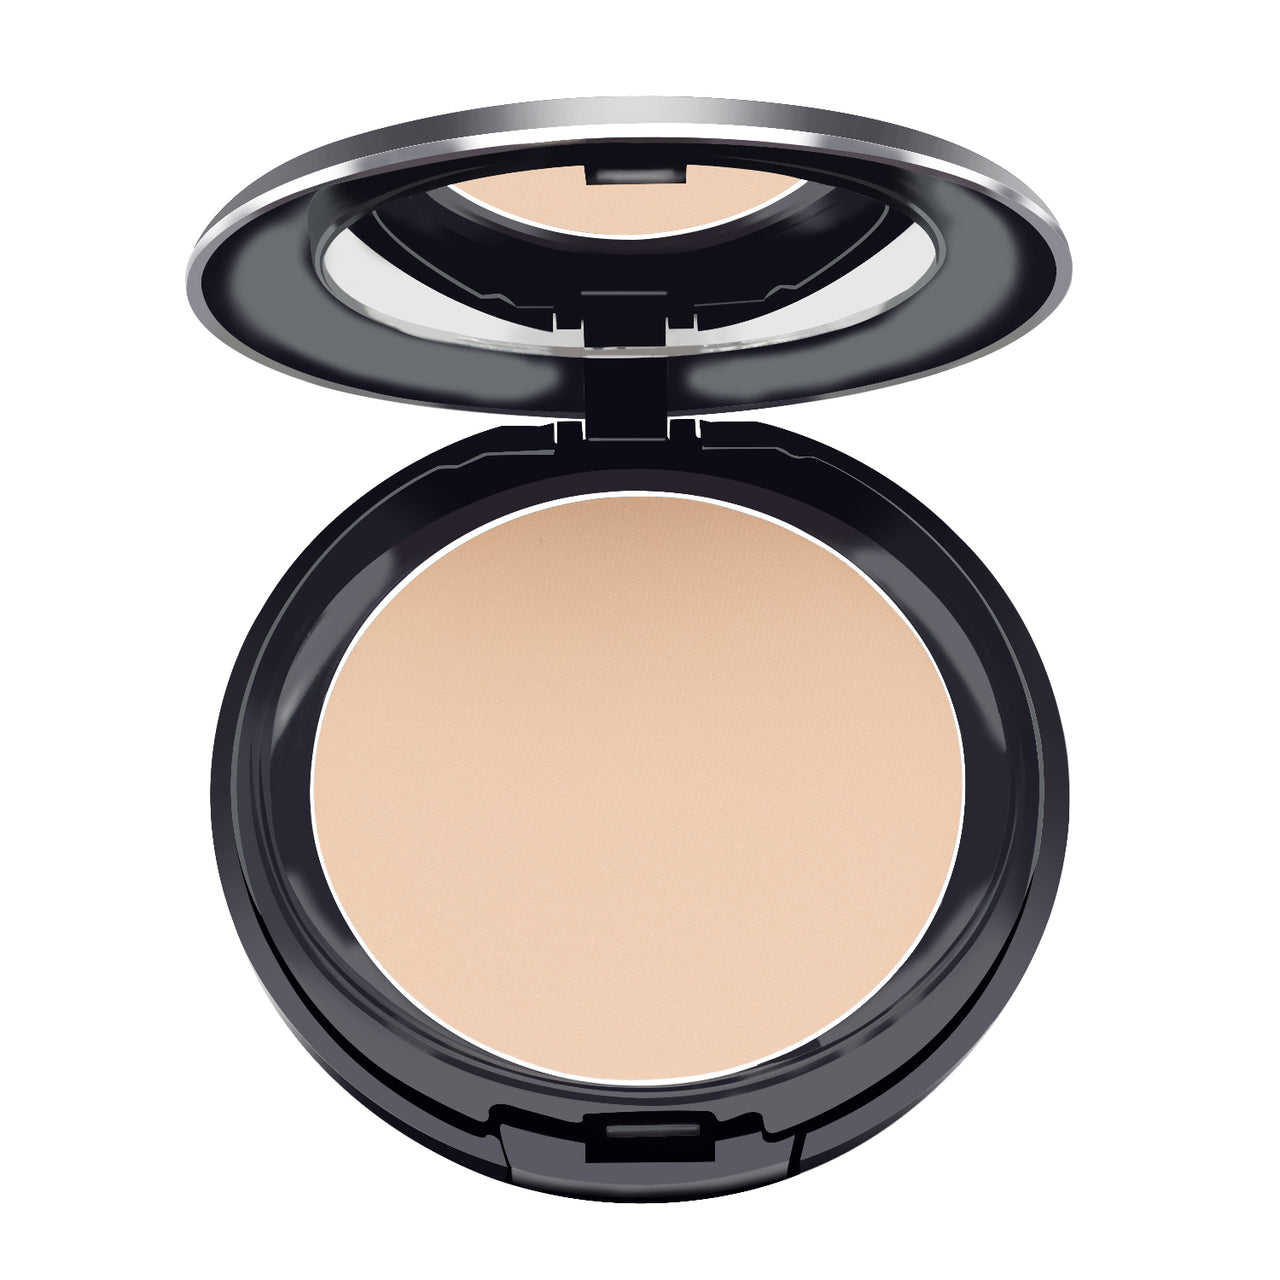 Glamgals Hollywood-U.S.A 3 In 1 Three Way Cake Compact Makeup+ Foundation + Concealer Spf 15, (Pink) - Distacart